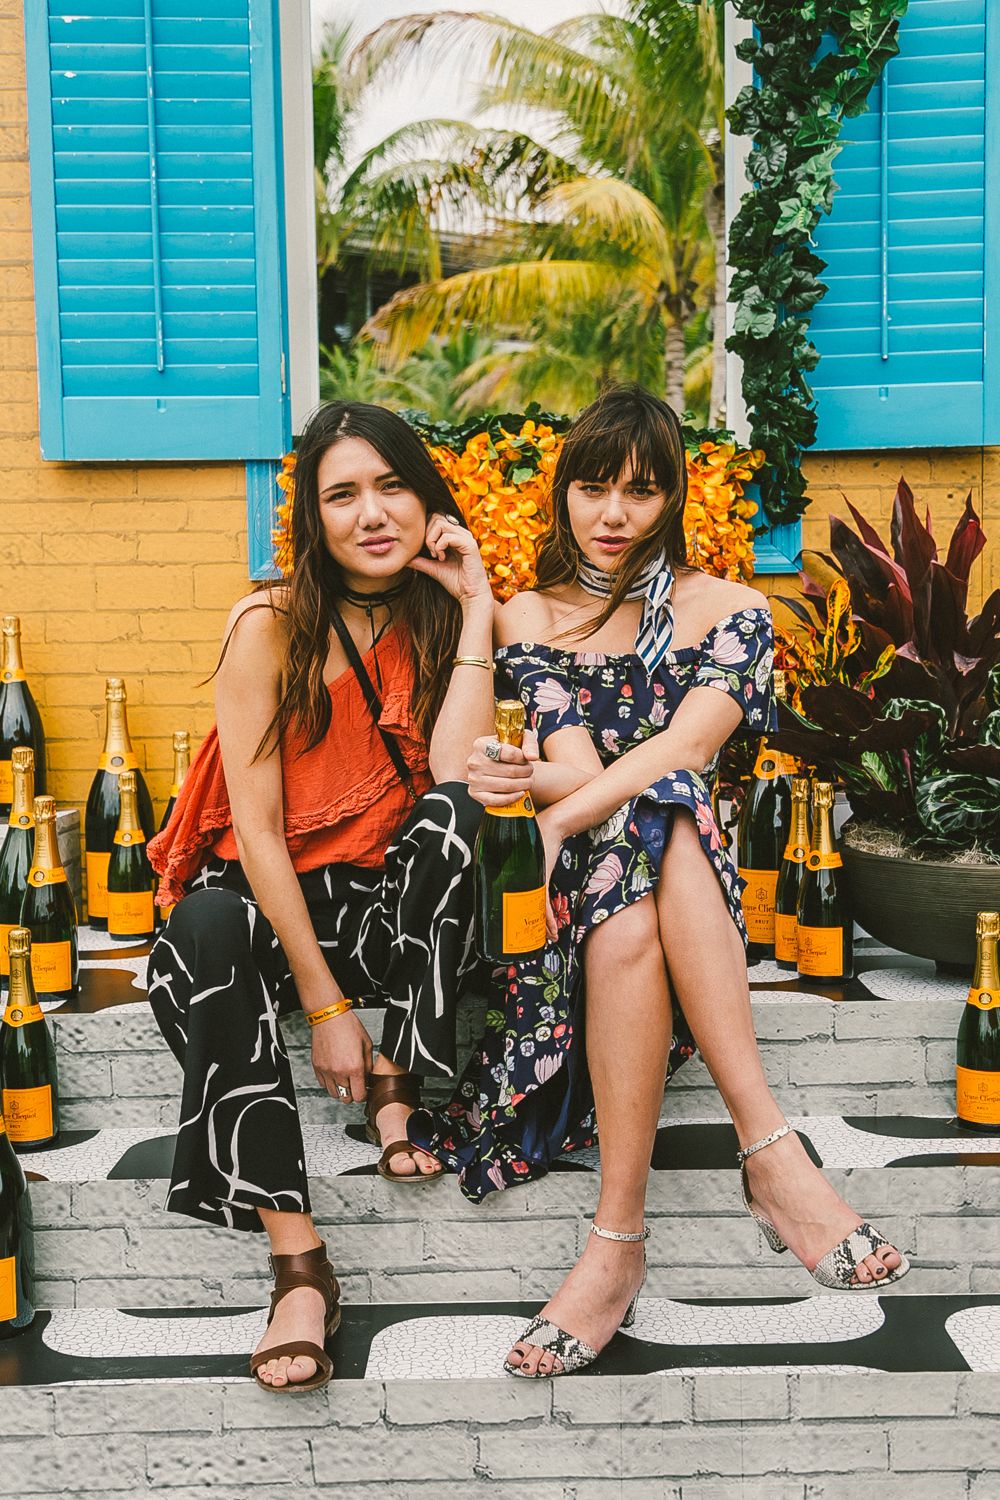 Unconventional': Veuve Clicquot toes the line between democratic and  aspirational on Tumblr - Digiday